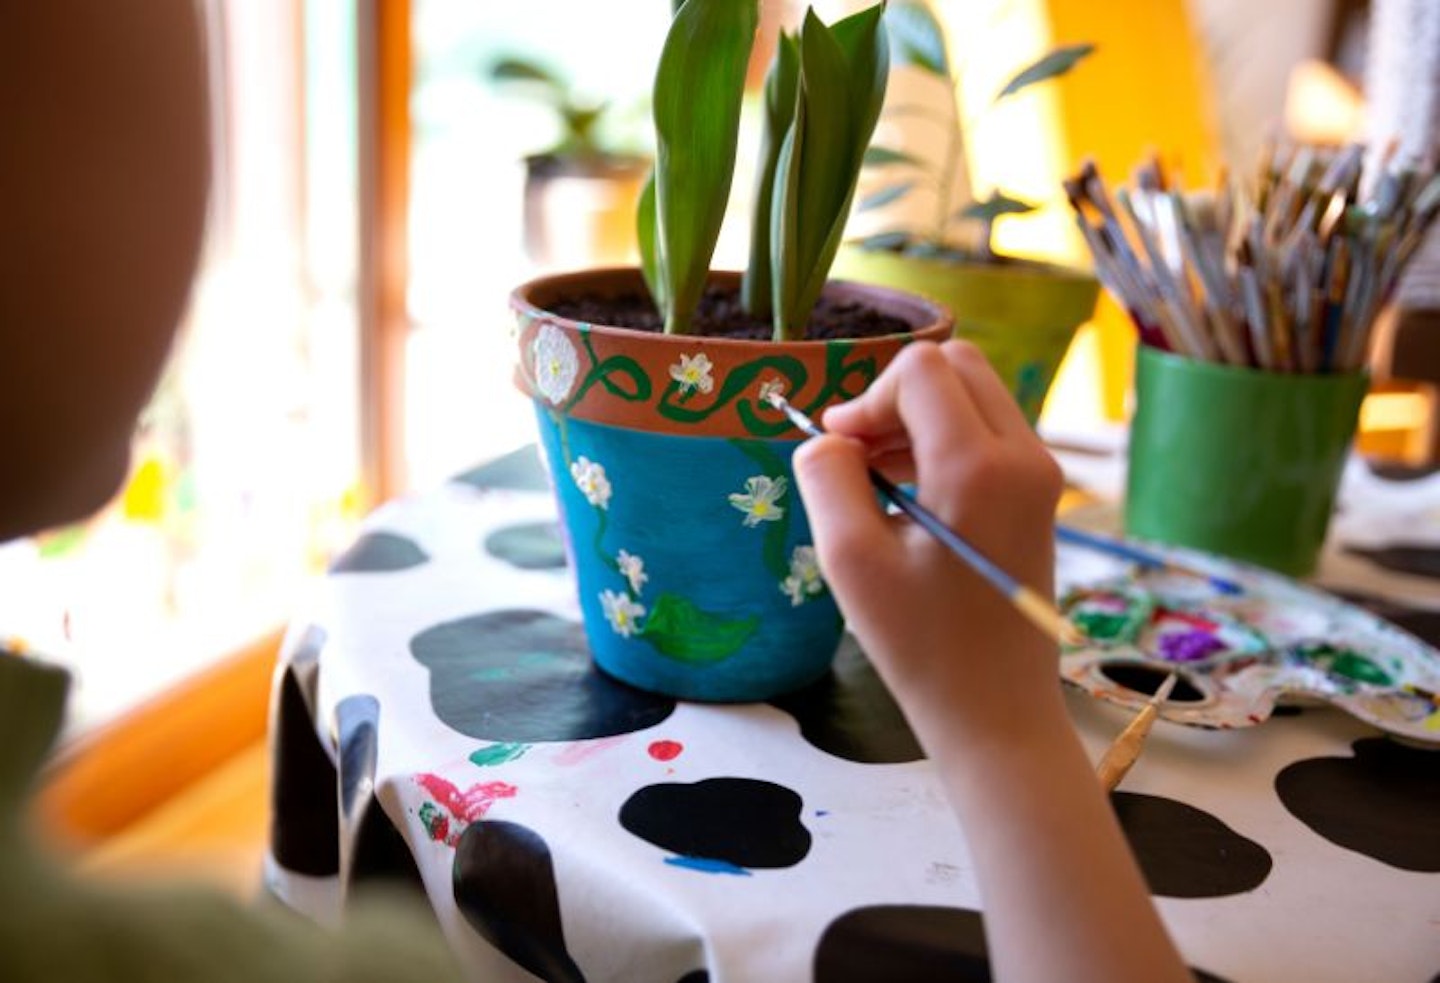 Child's hand painting patterns on a terracotta plant pot